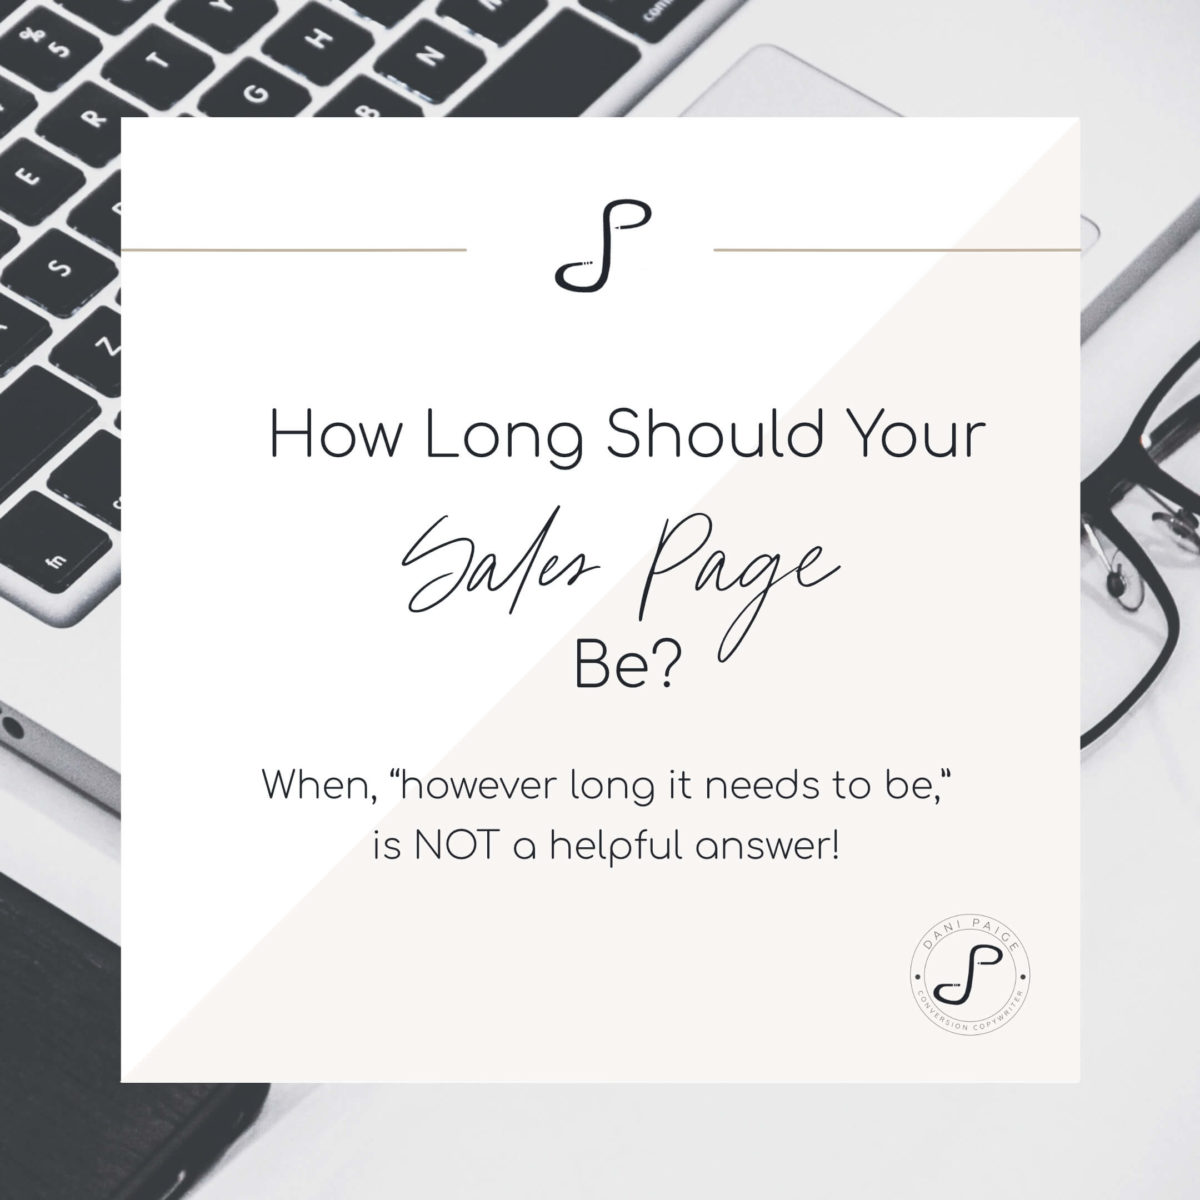 How-long-sales-page-be-not-helpful | Dani Paige Copywriter